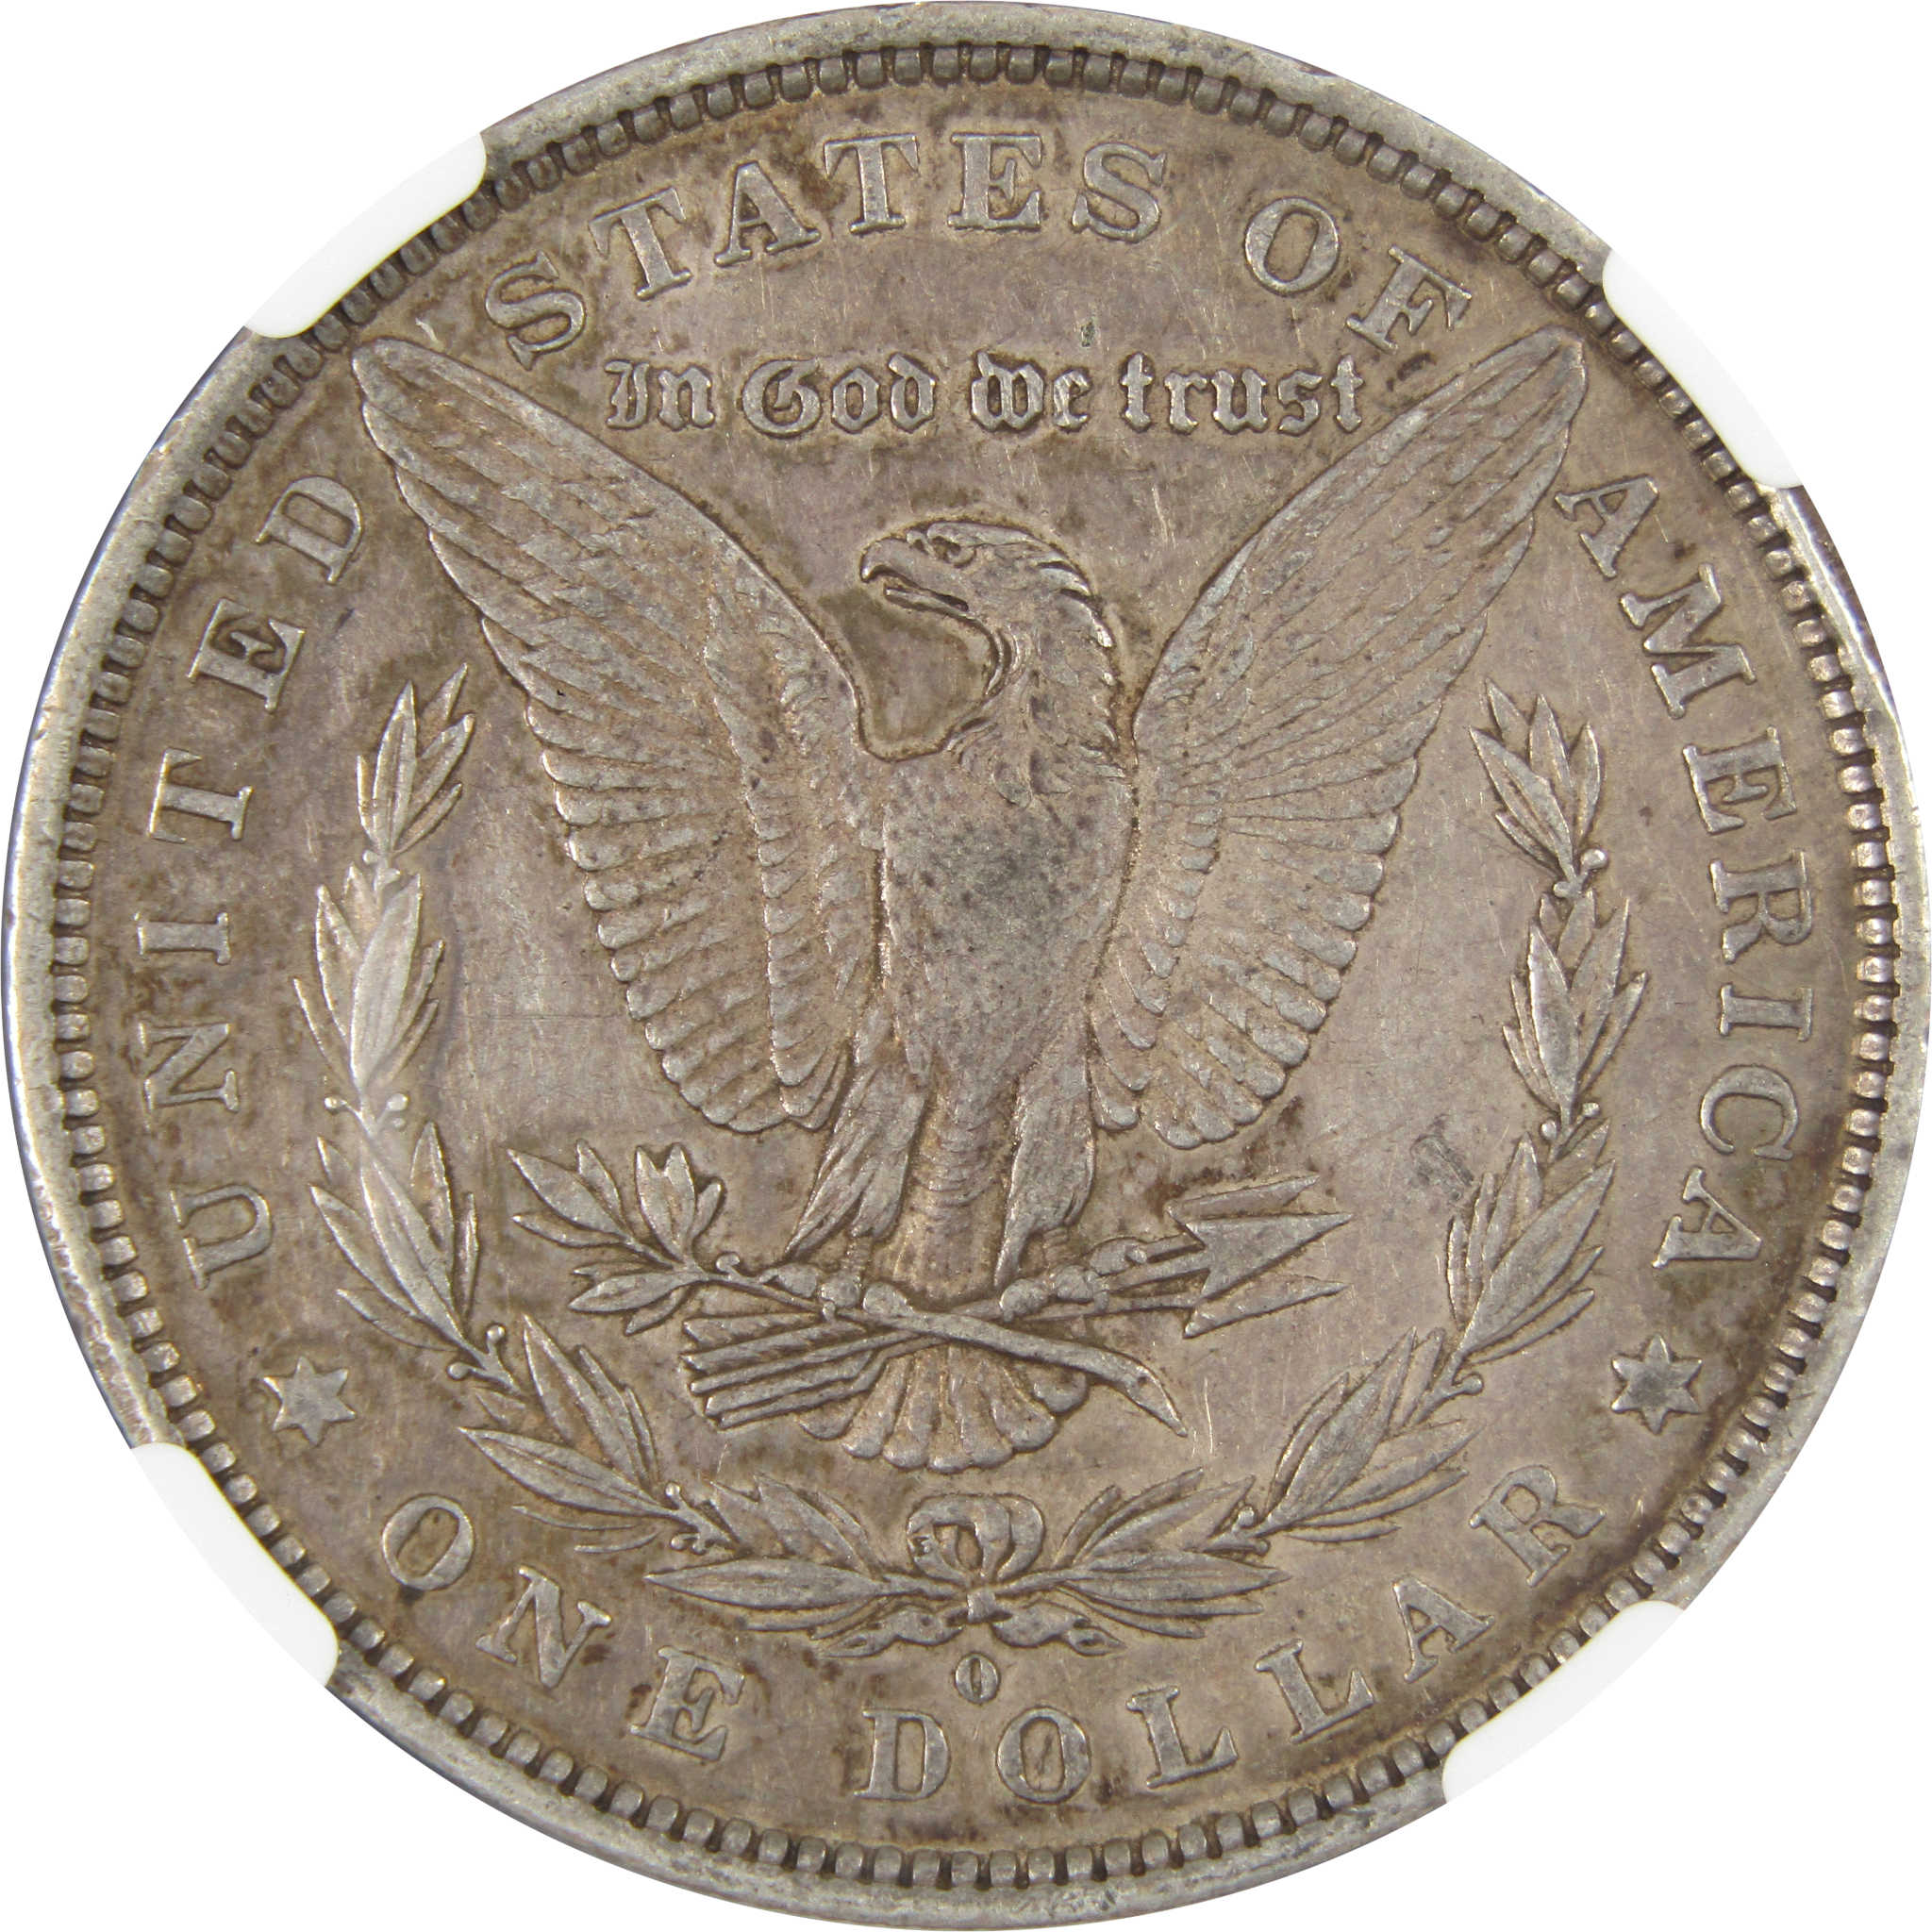 1882 O/S VAM-4 Recessed S EDS Top 100 Morgan Dollar XF45 NGC SKU:I7788 - Morgan coin - Morgan silver dollar - Morgan silver dollar for sale - Profile Coins &amp; Collectibles